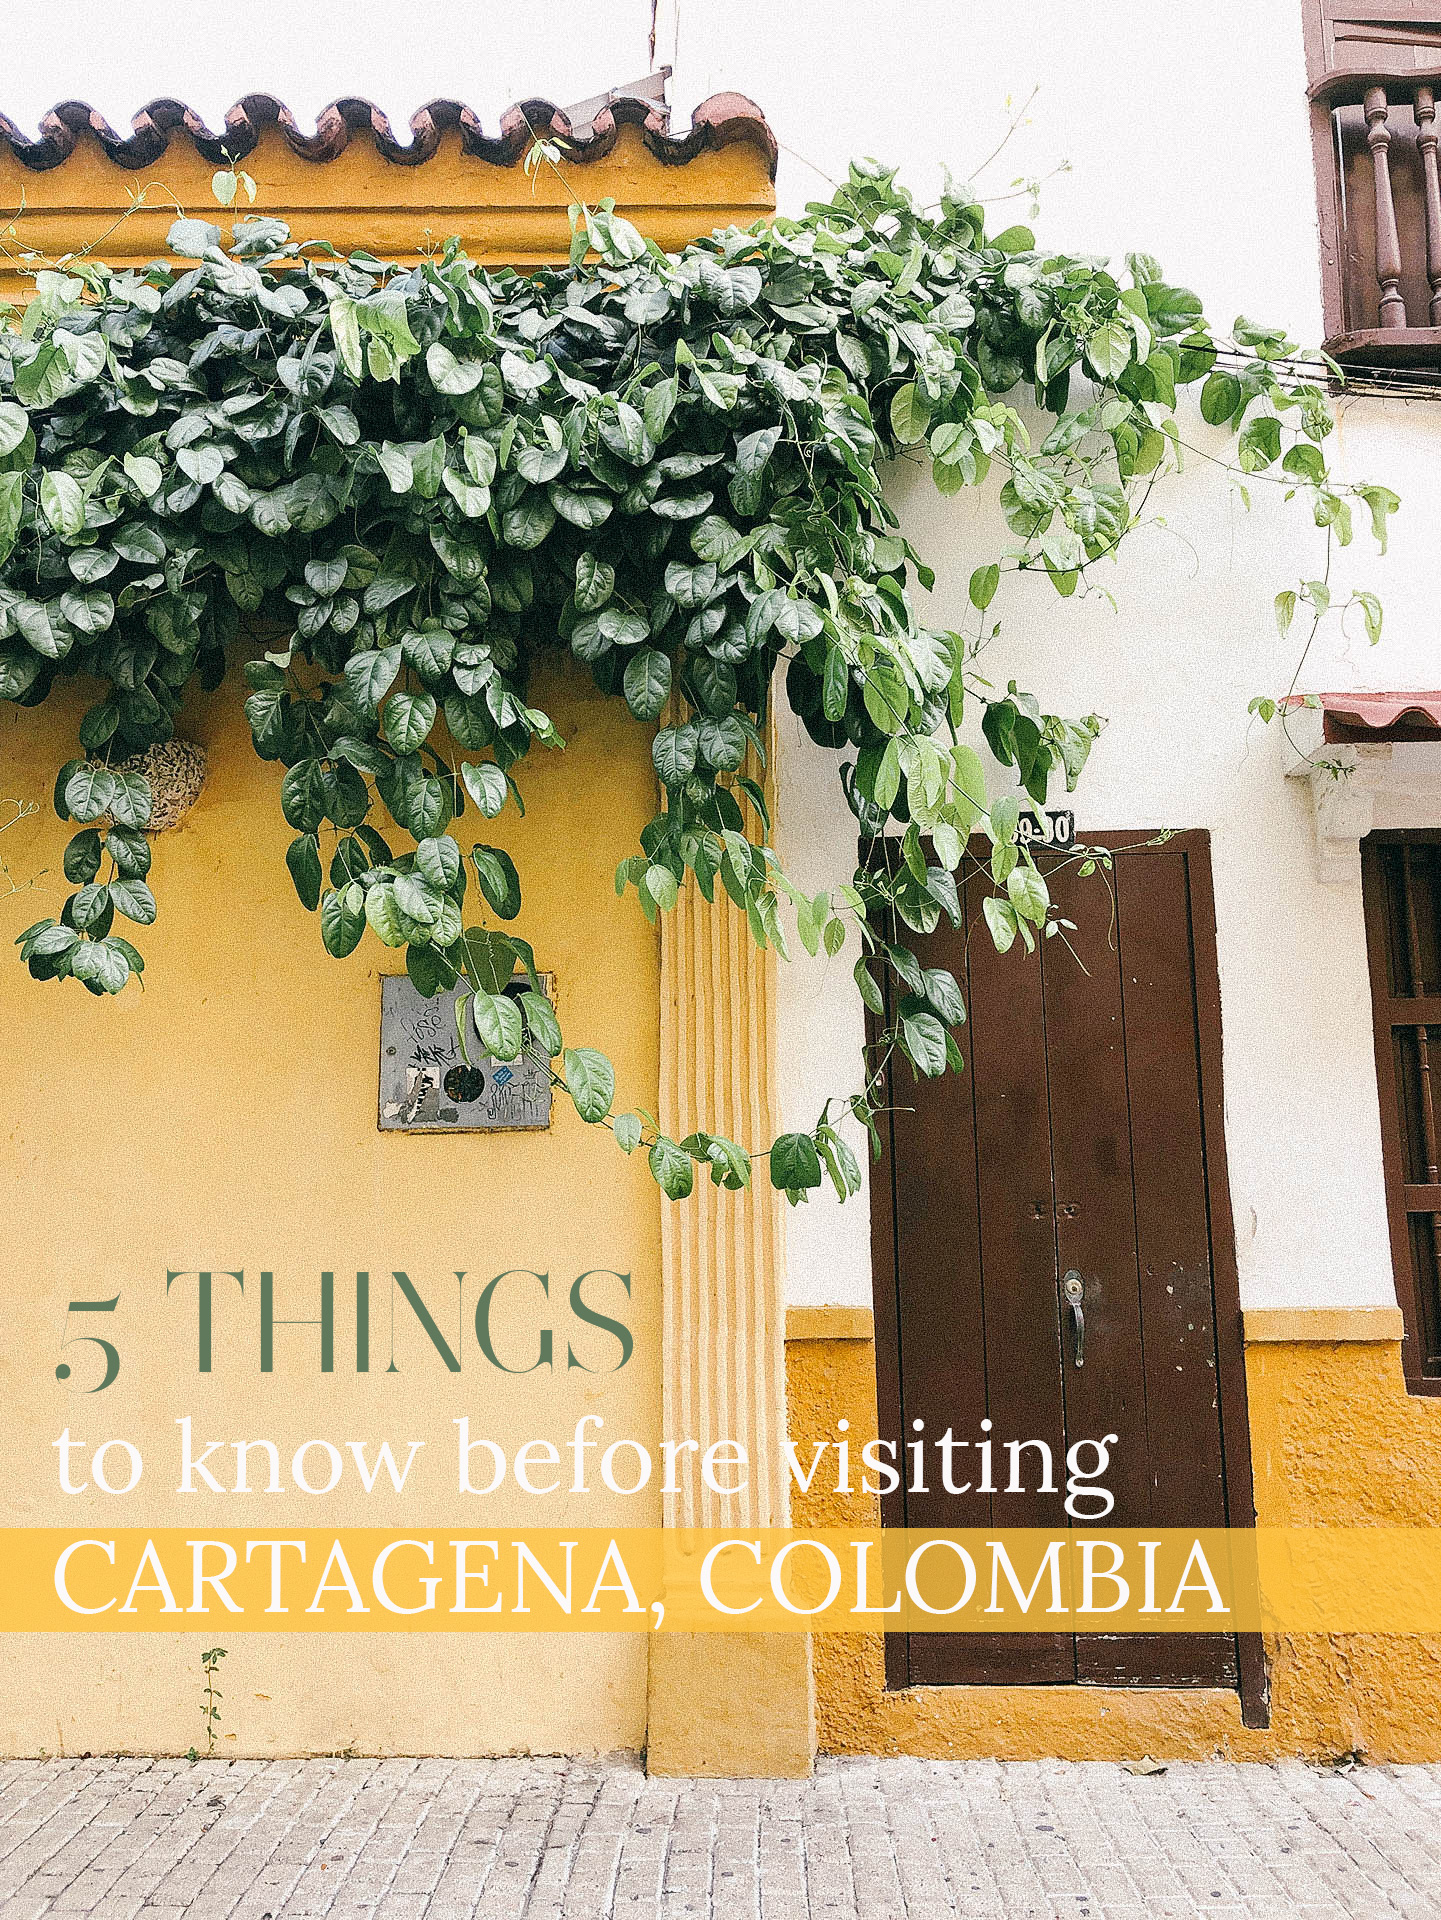 5 Things to Know Before Visiting Cartagena, Colombia